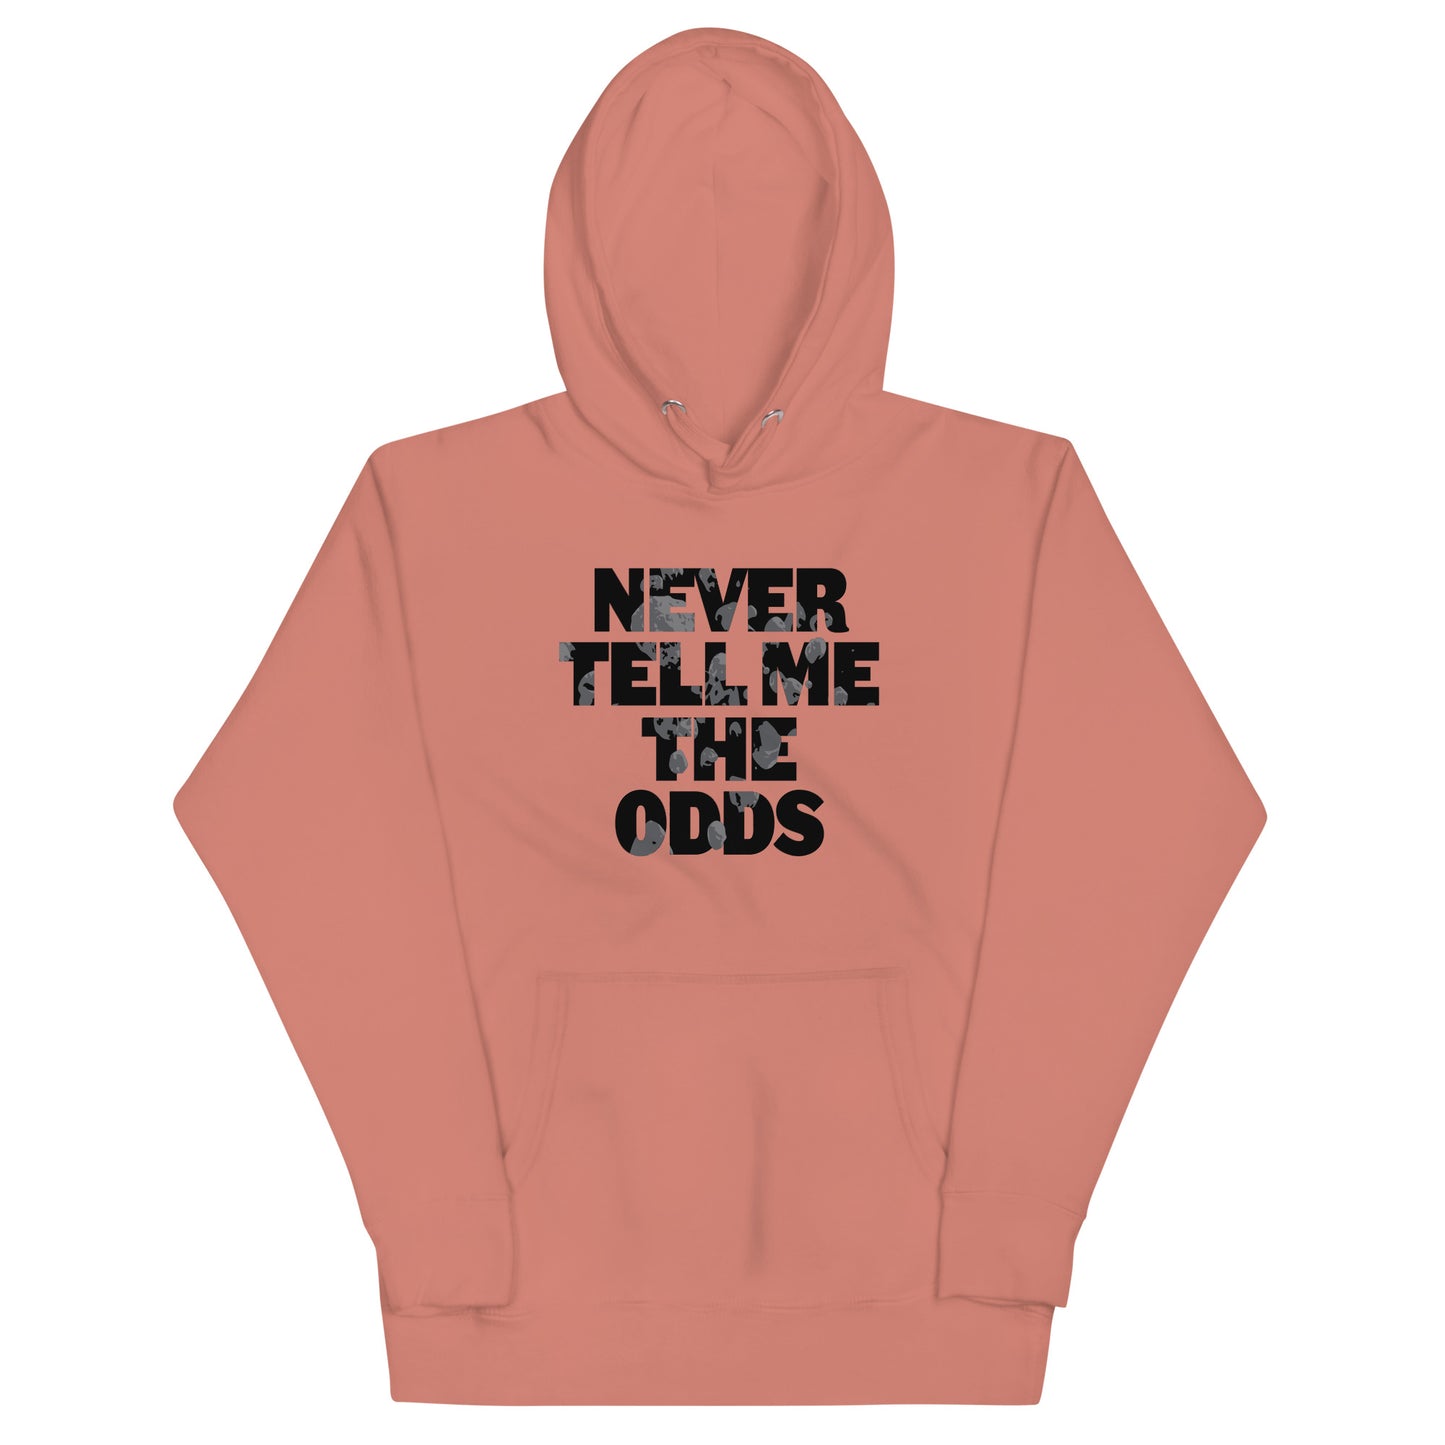 Never Tell Me The Odds Unisex Hoodie